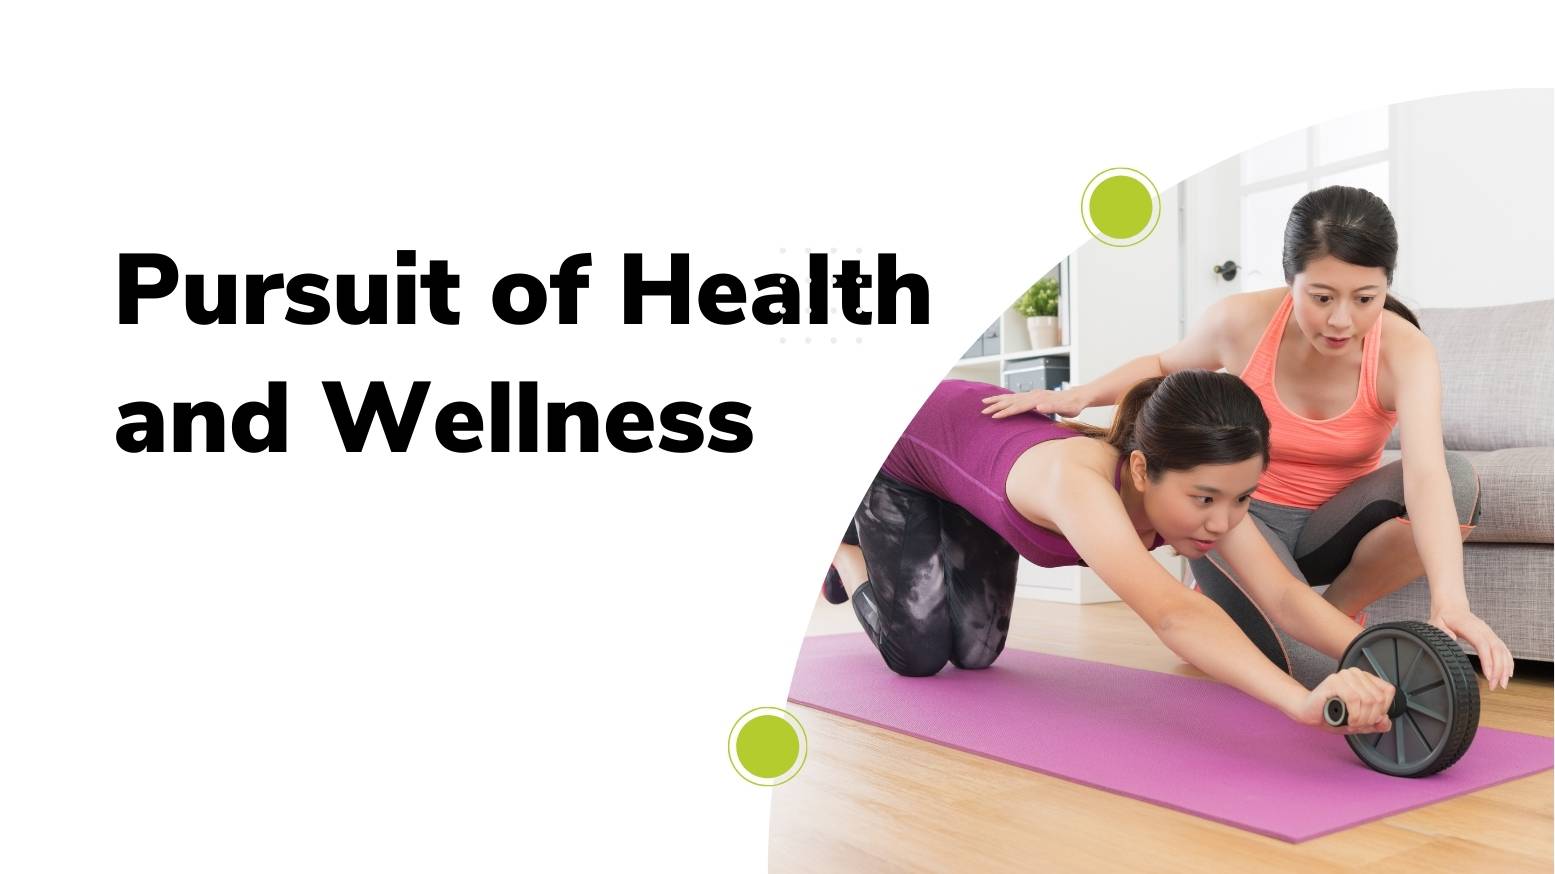 Pursuit of Health and Wellness